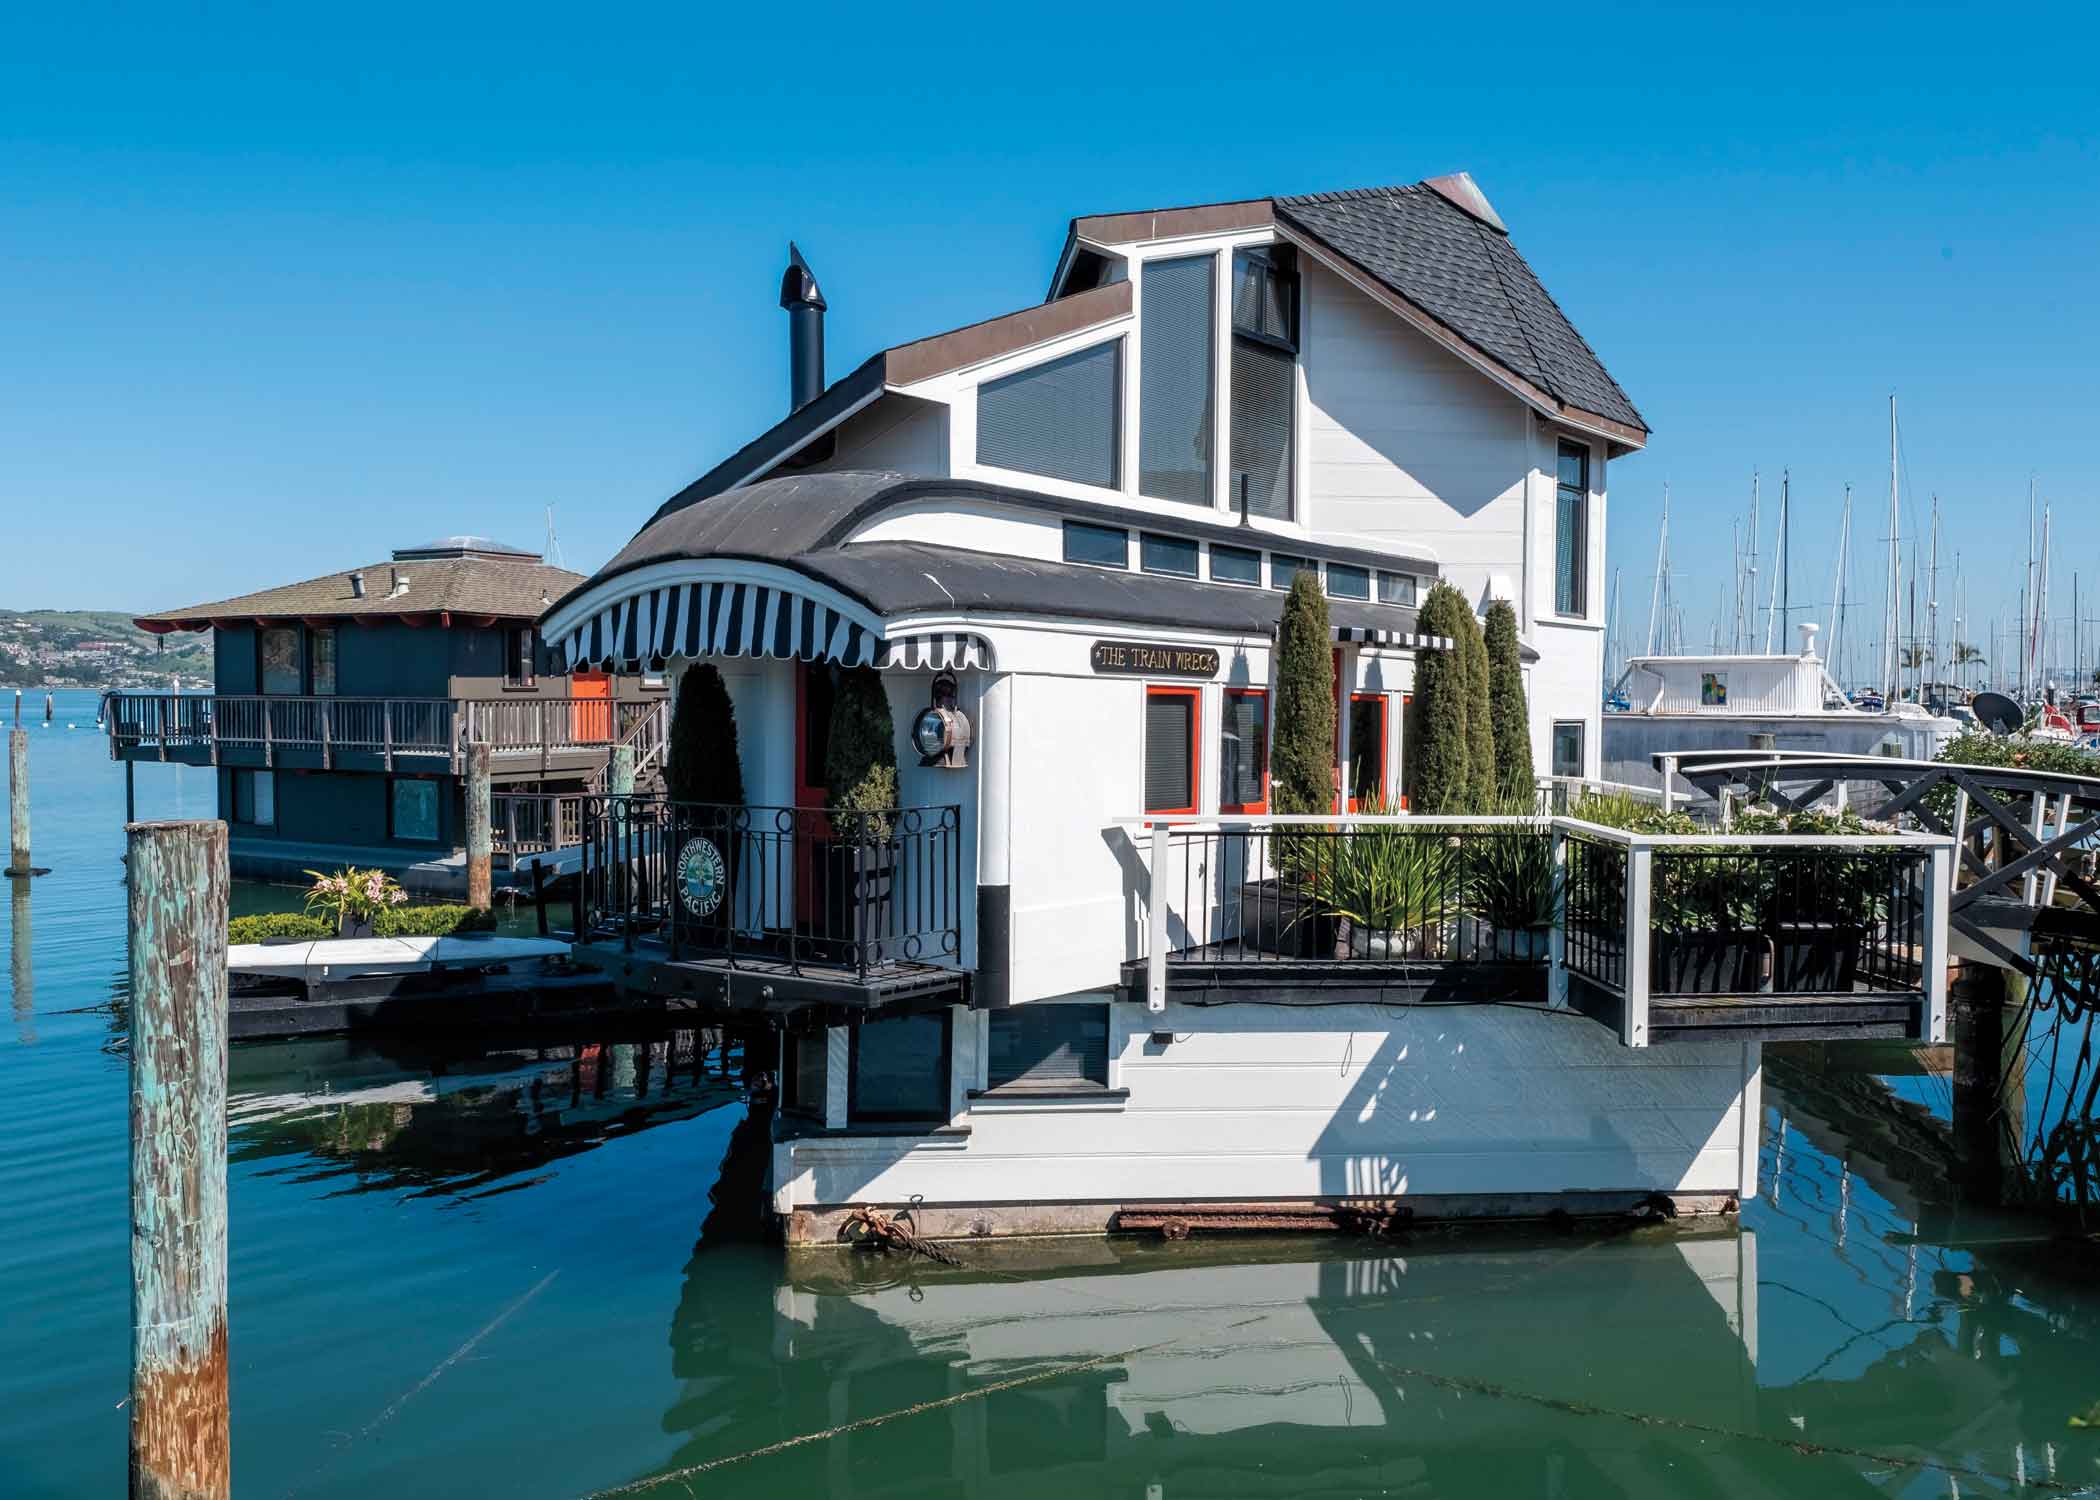 "Train Wreck" floating home in Sausalito